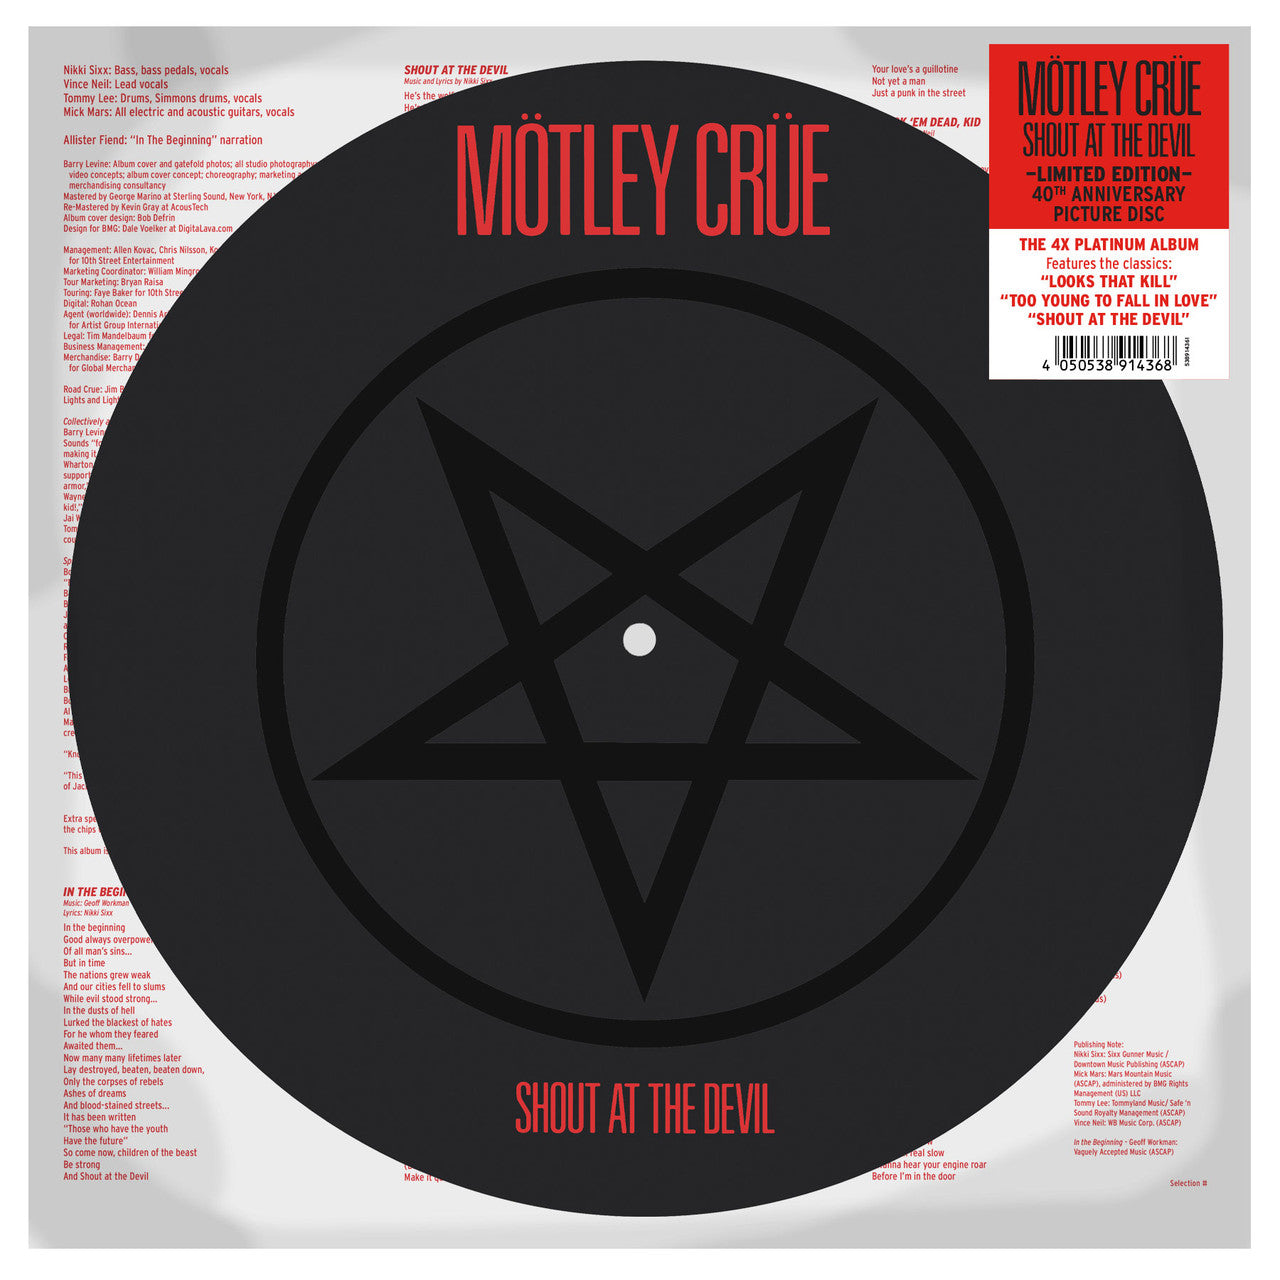 Motley Crue - Shout At The Devil [LP] Limited 40th Anniversary Picture Disc